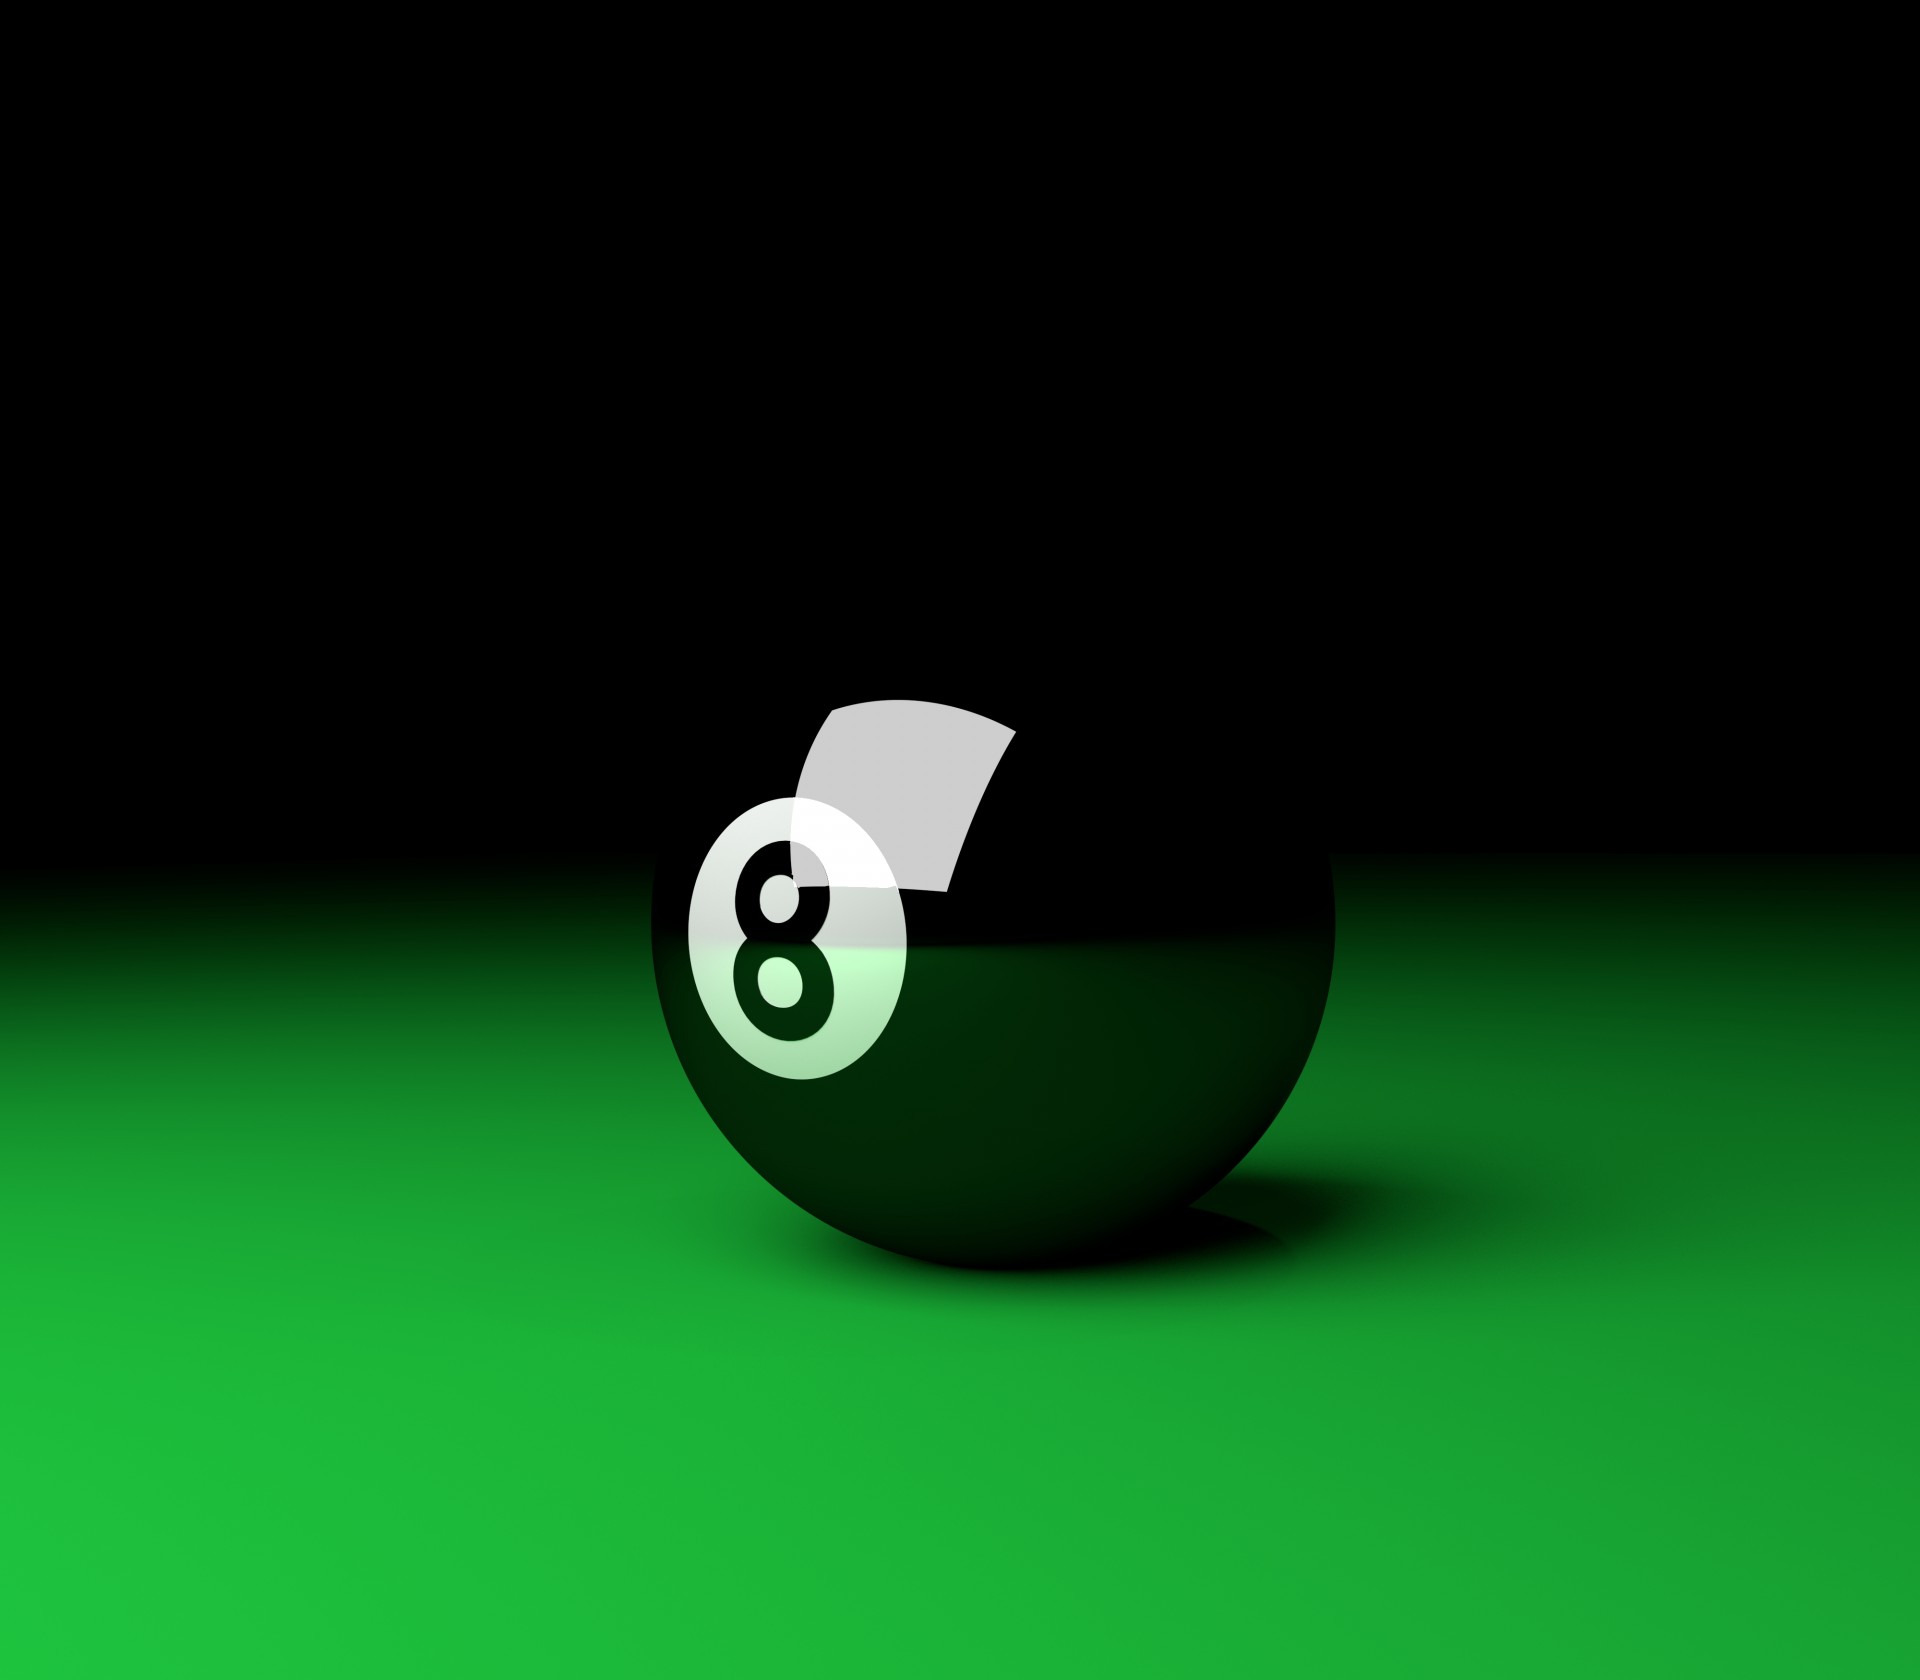 Eight Ball Free Stock Photo - Public Domain Pictures